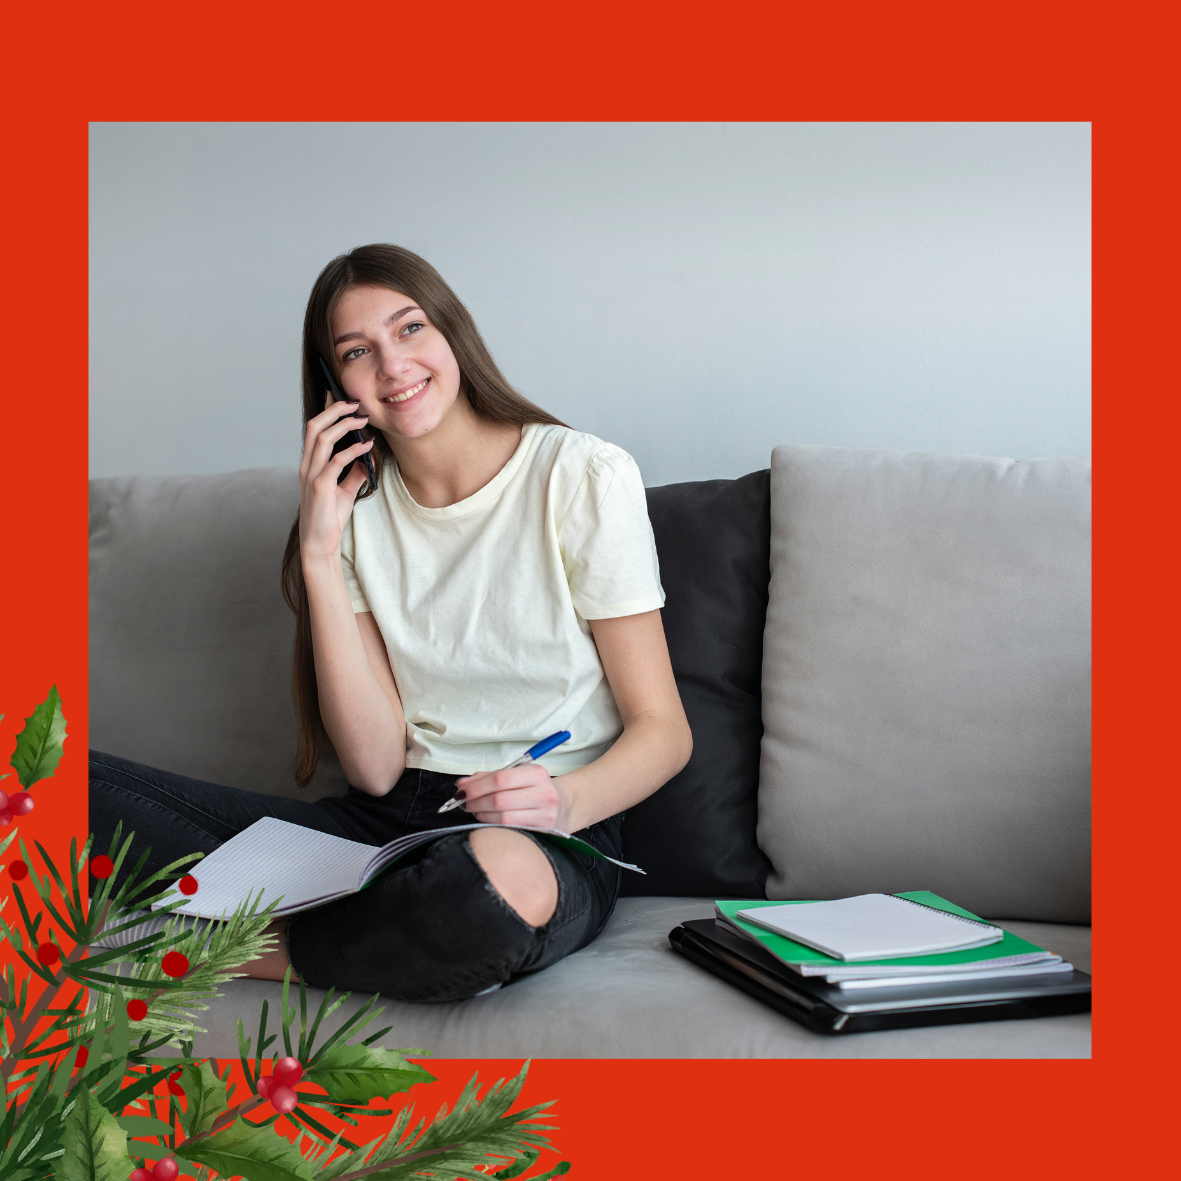 An image of a teenage girl, with long brunette hair, talking on the phone. She is using her other hand to make notes in a notebook and is sat crossed legged on a sofa. There is holly and berries in the left hand corner.